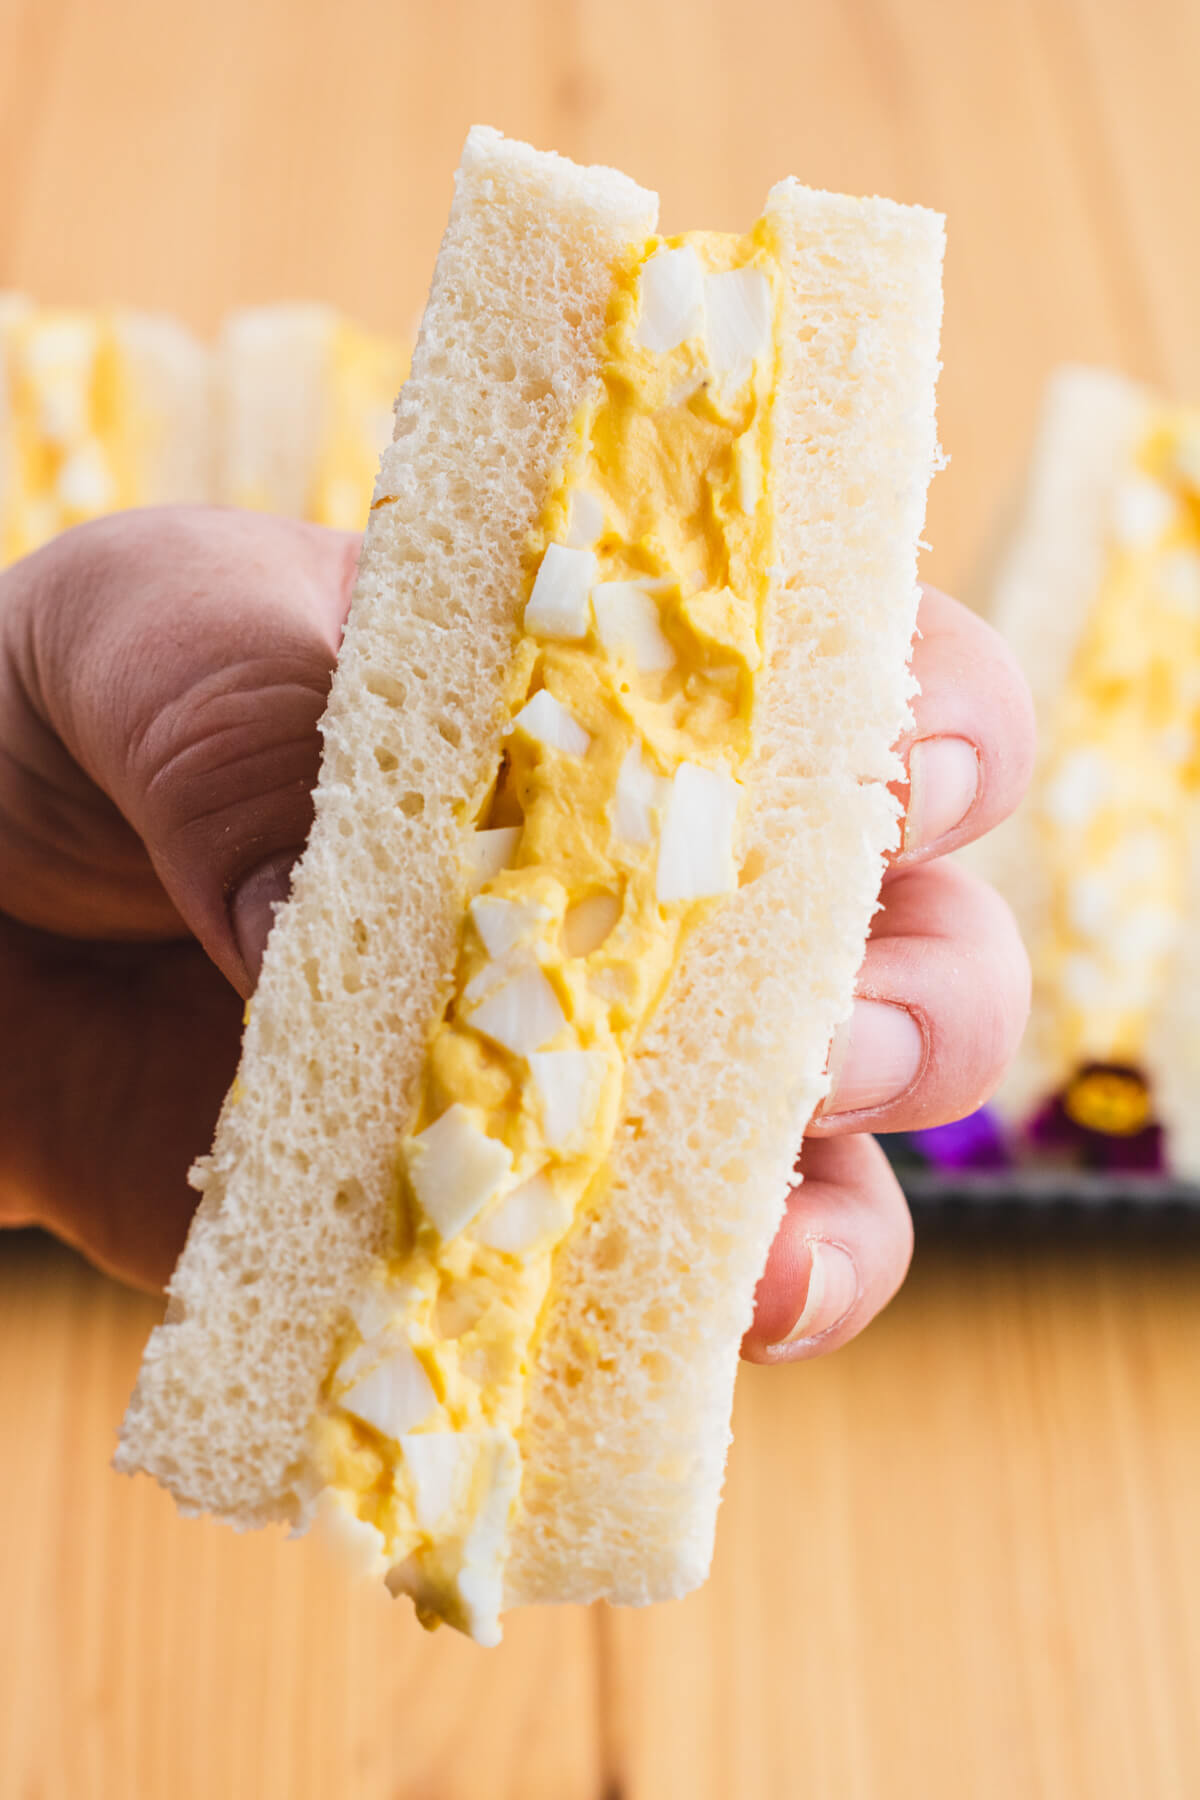 A hand holding a rich yellow egg salad sandwich on fluffy white crust less bread.